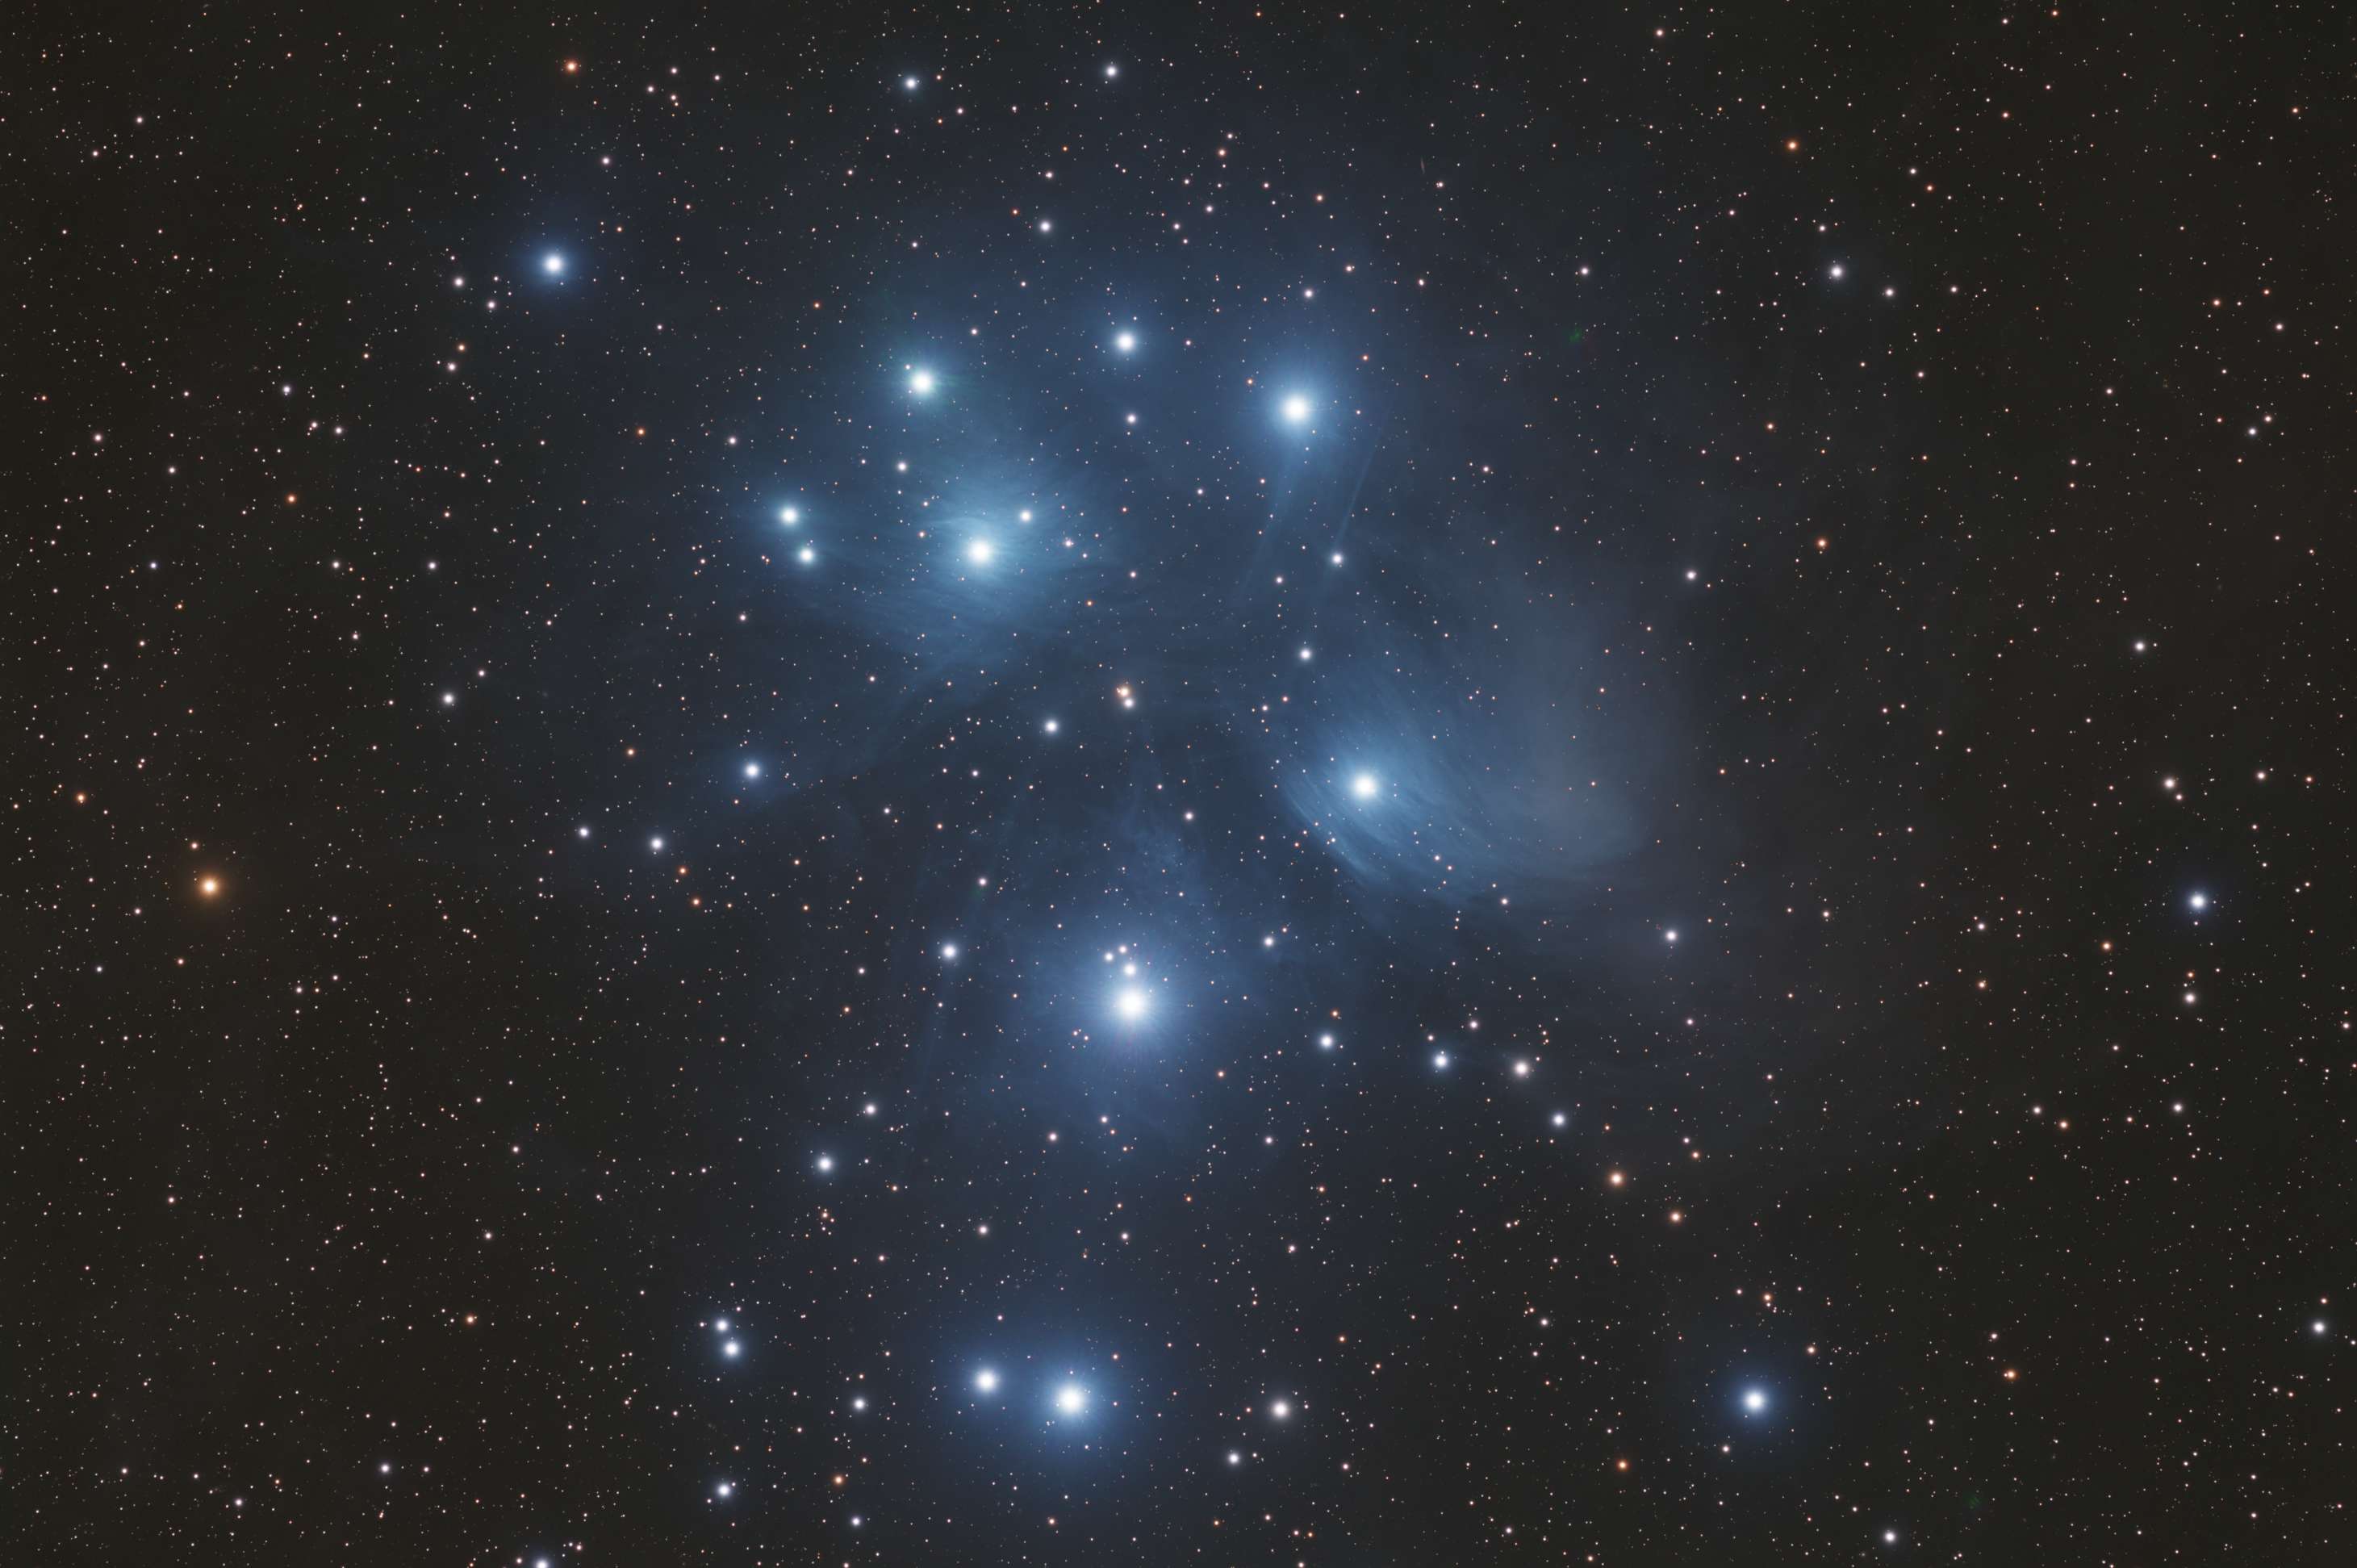 image from Pleiades